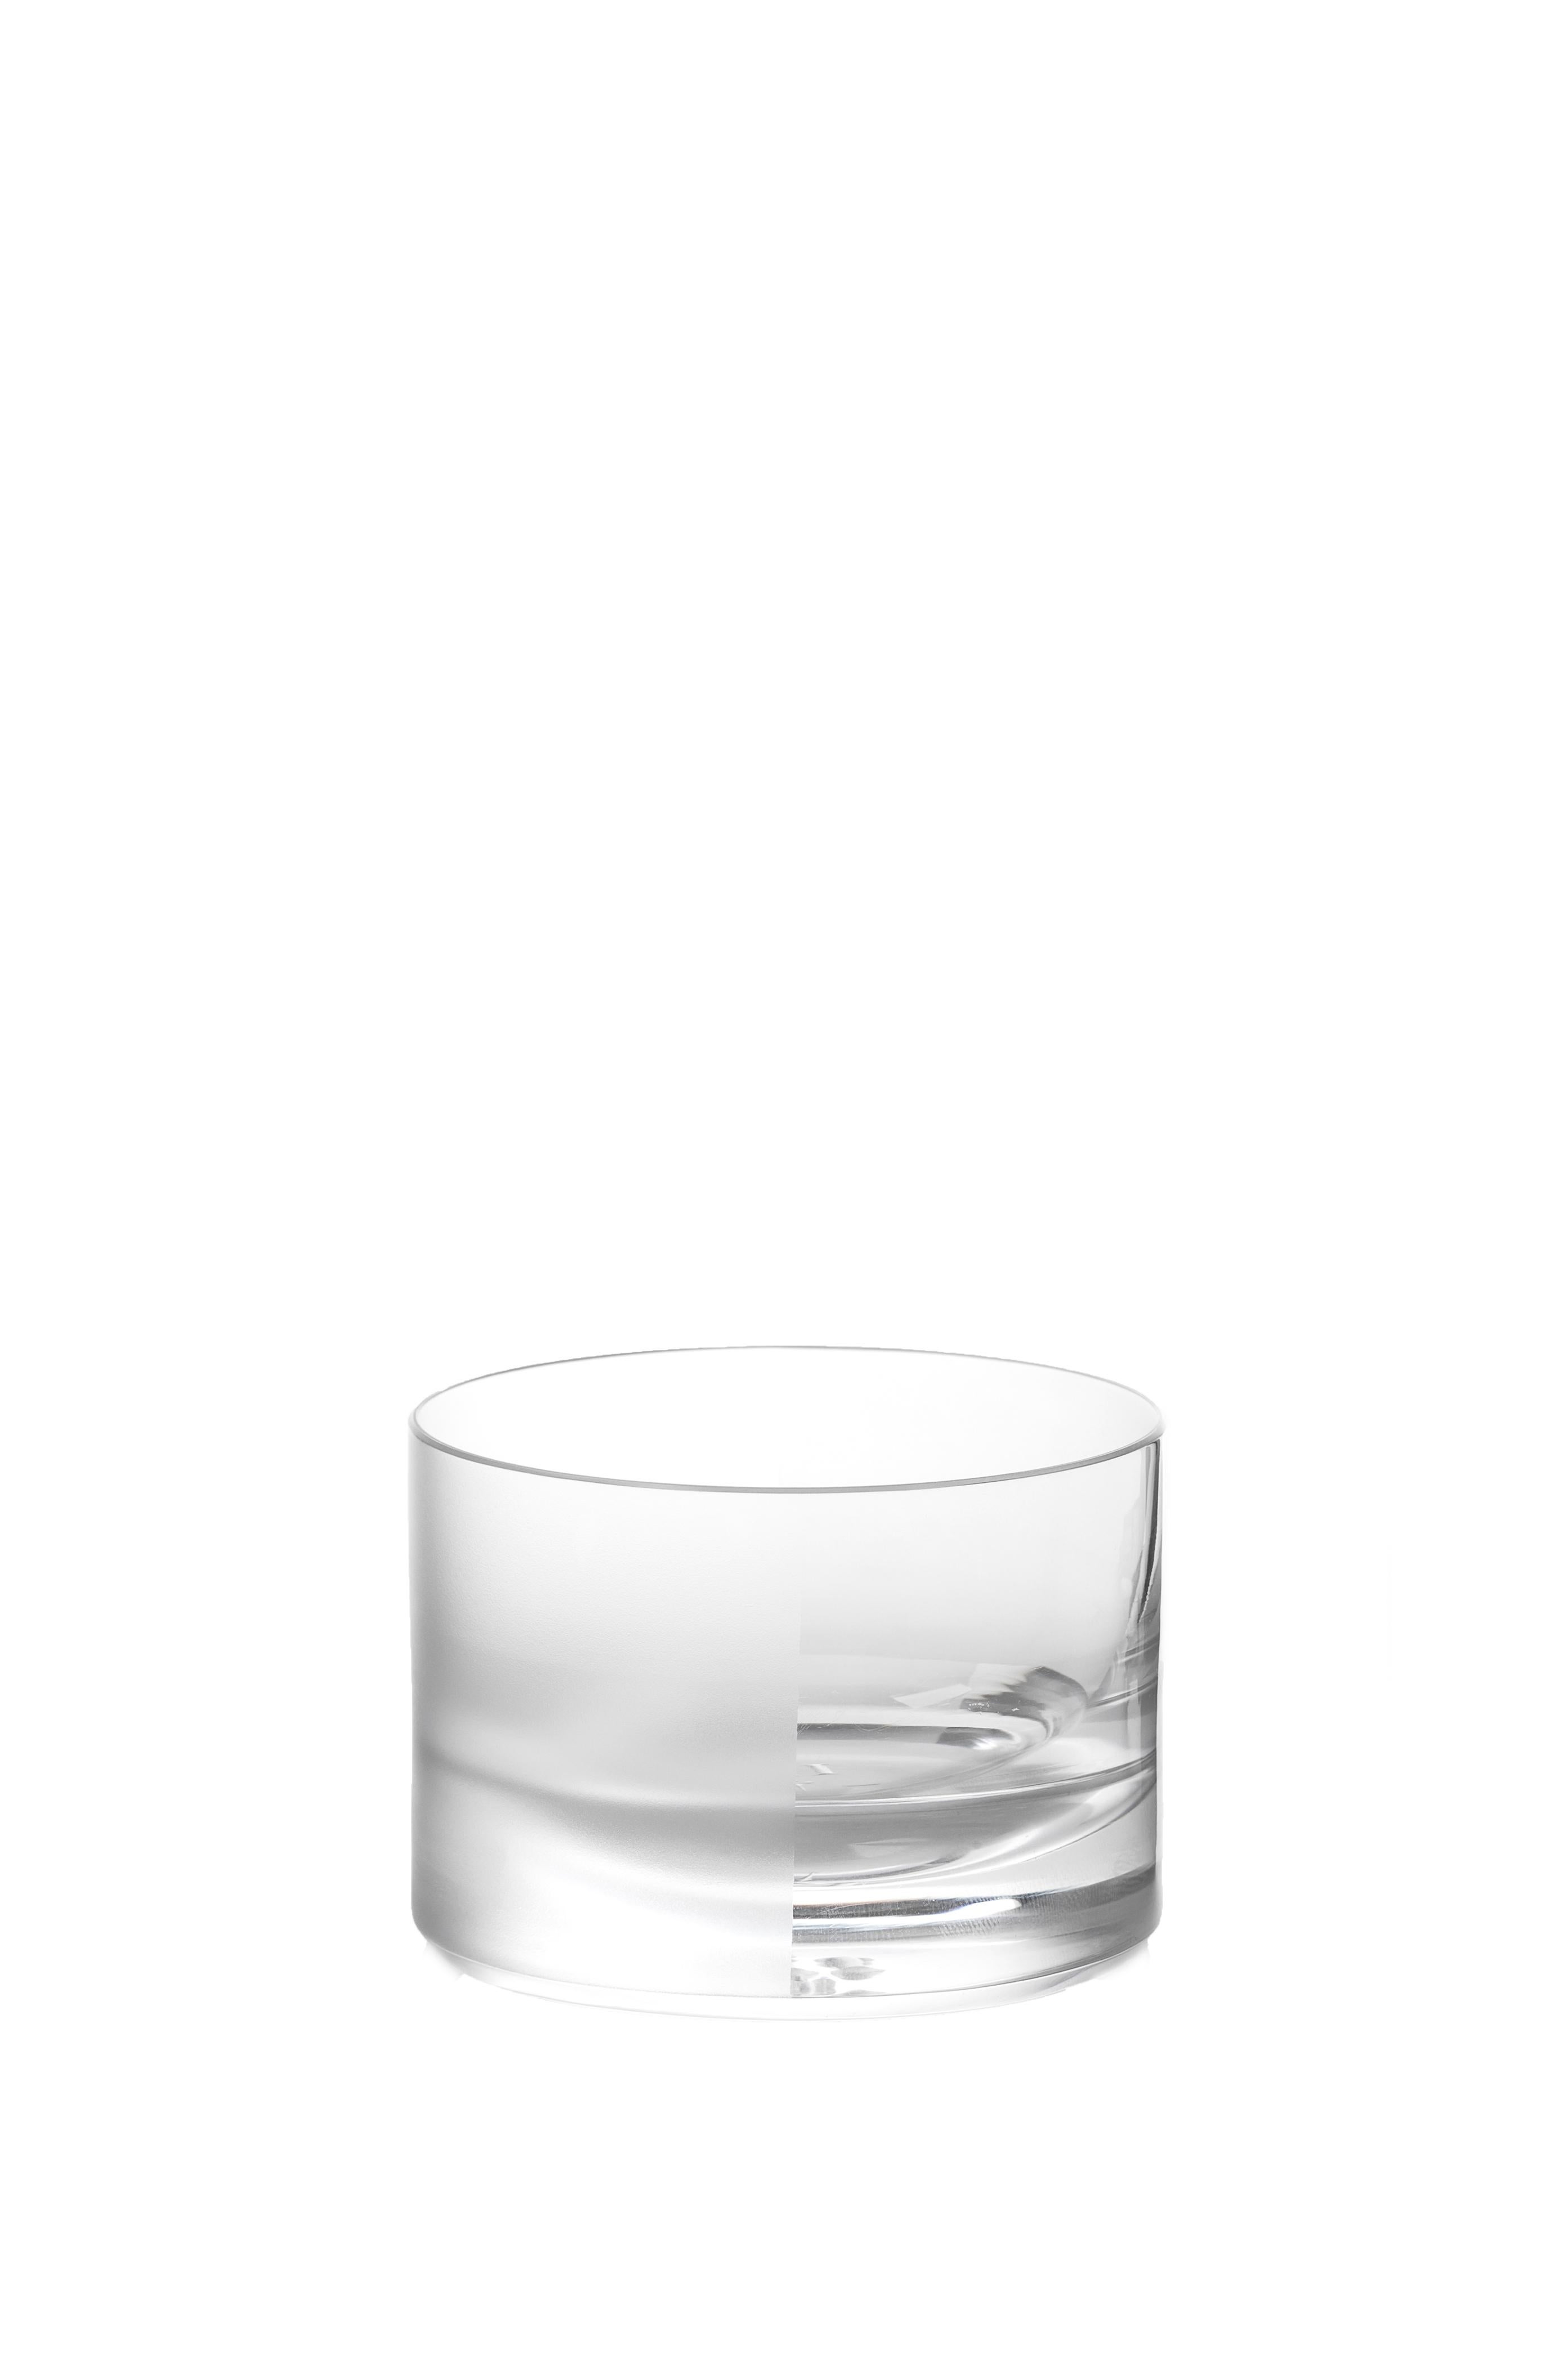 Contemporary Scholten & Baijings Handmade Irish Crystal Low Glass 'Elements' Series For Sale